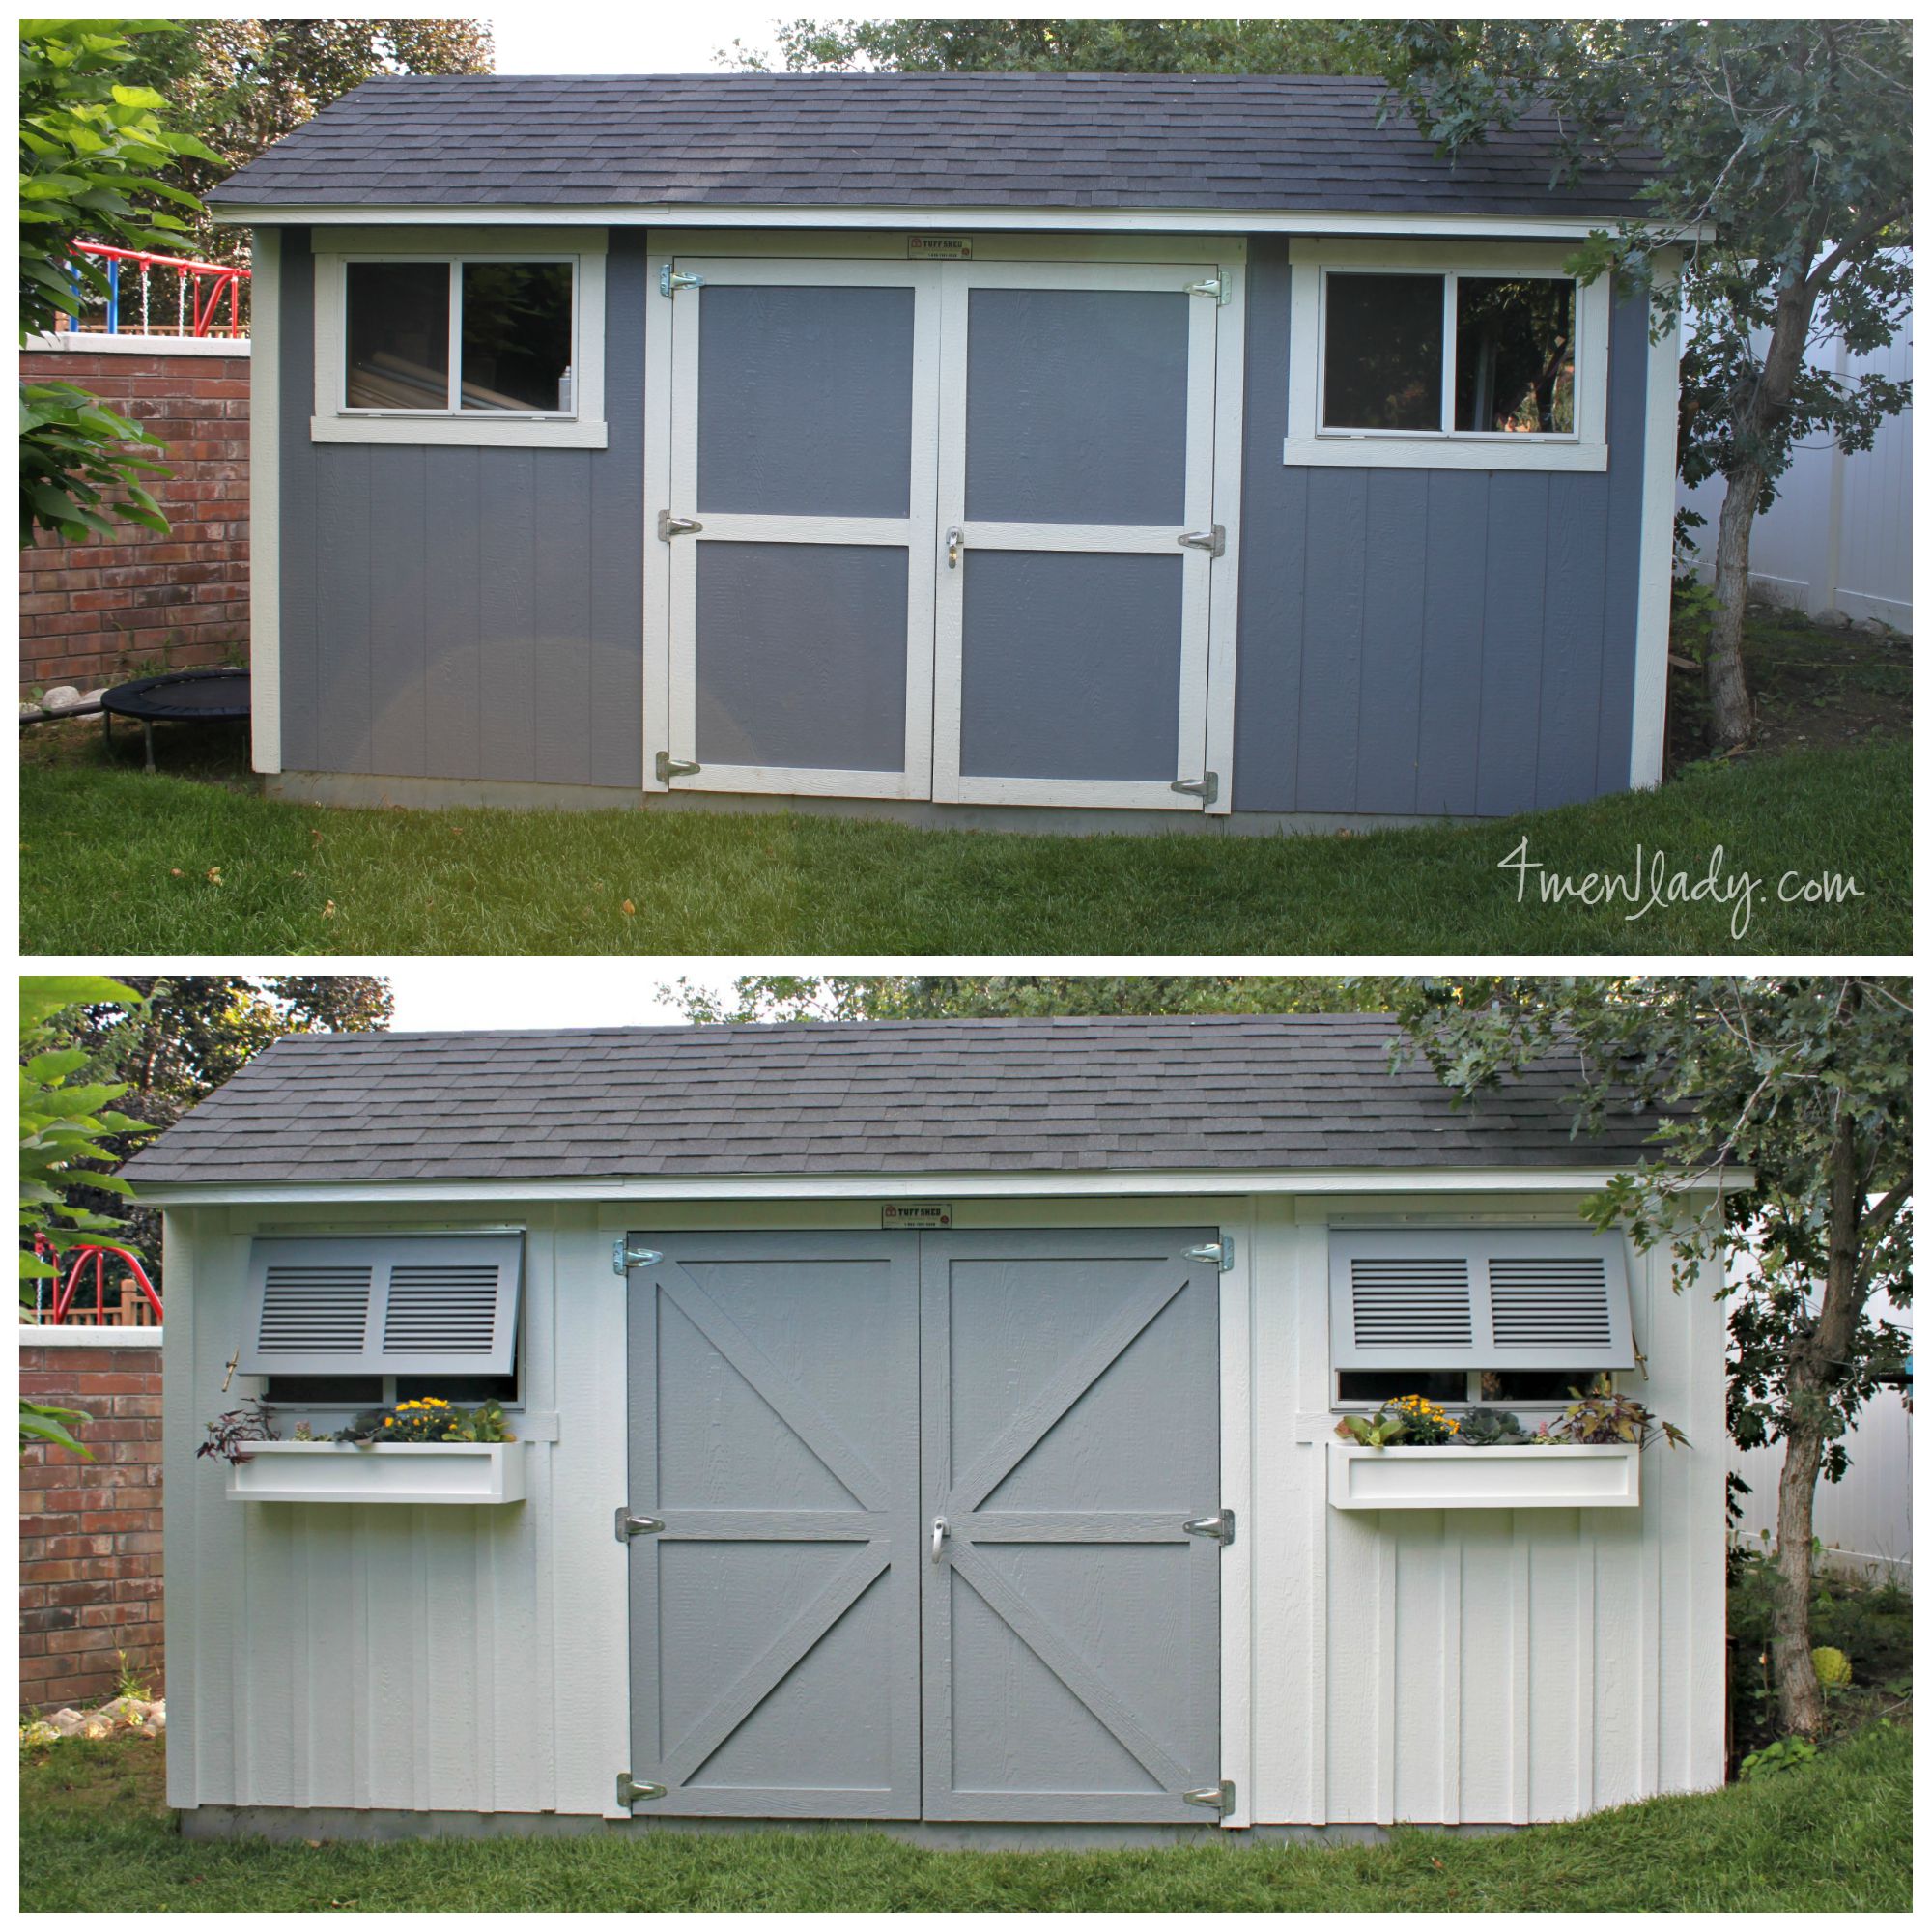 Tuff Shed Facelift + $100. gift card giveaway.